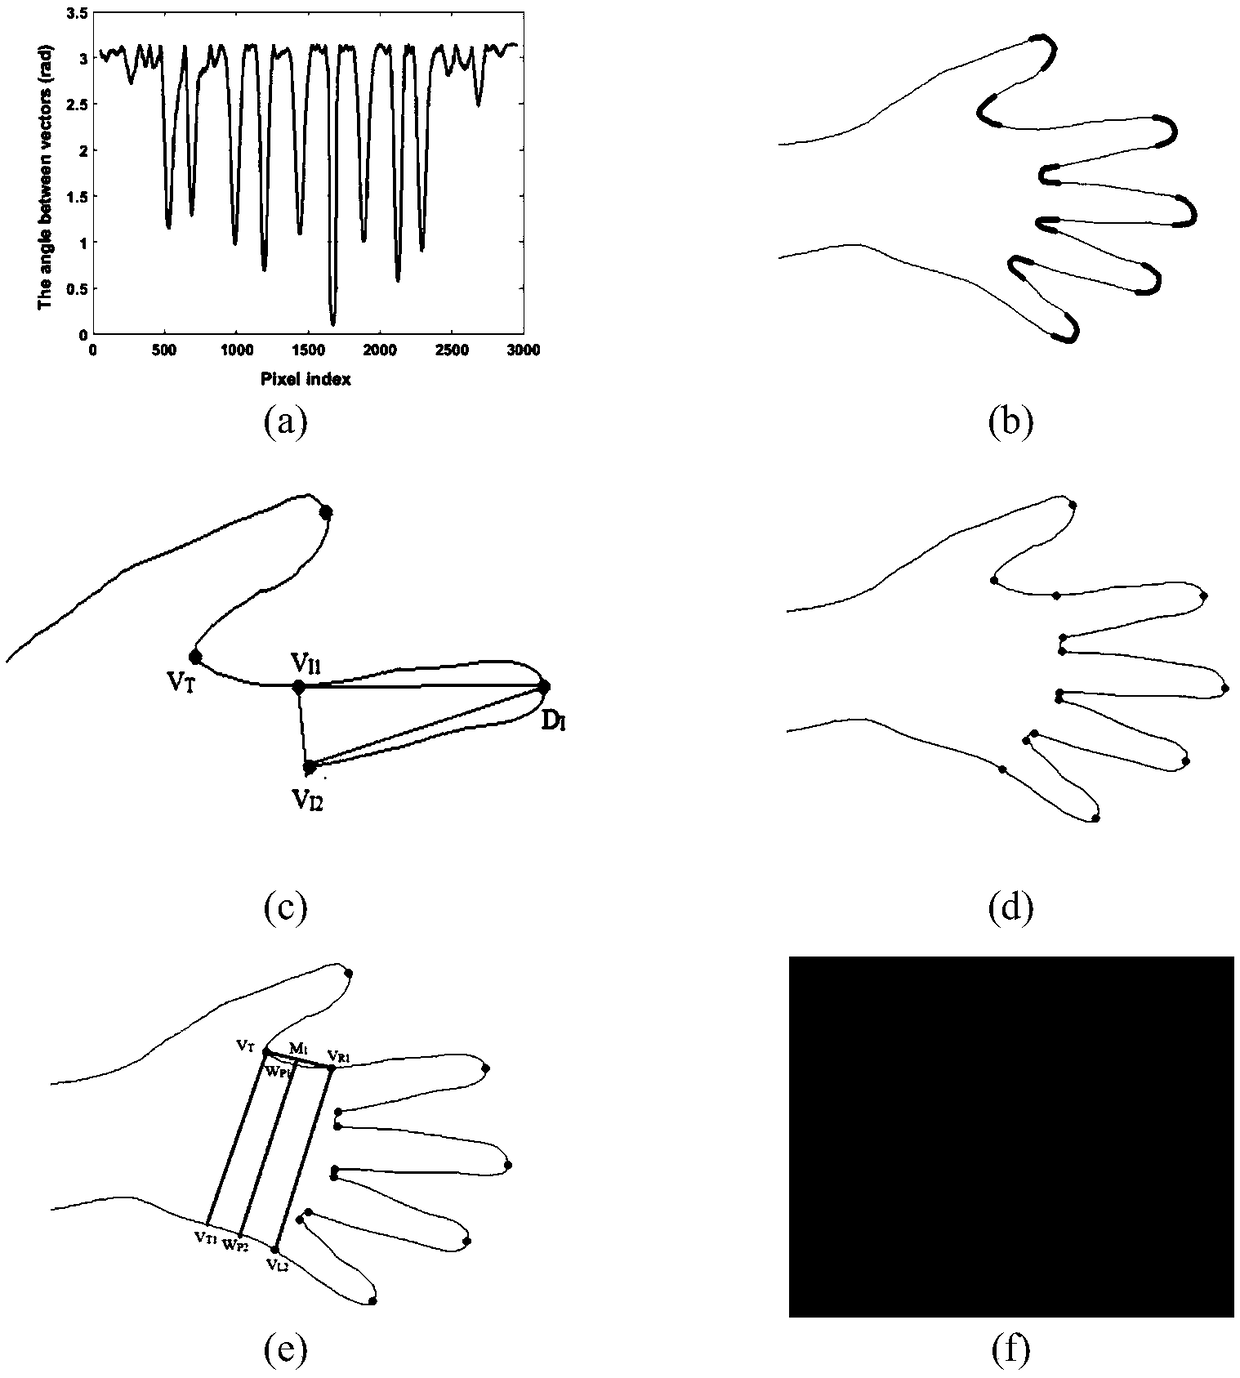 Hand/arm vein fusion identification method based on cumulative matching and equal error rate